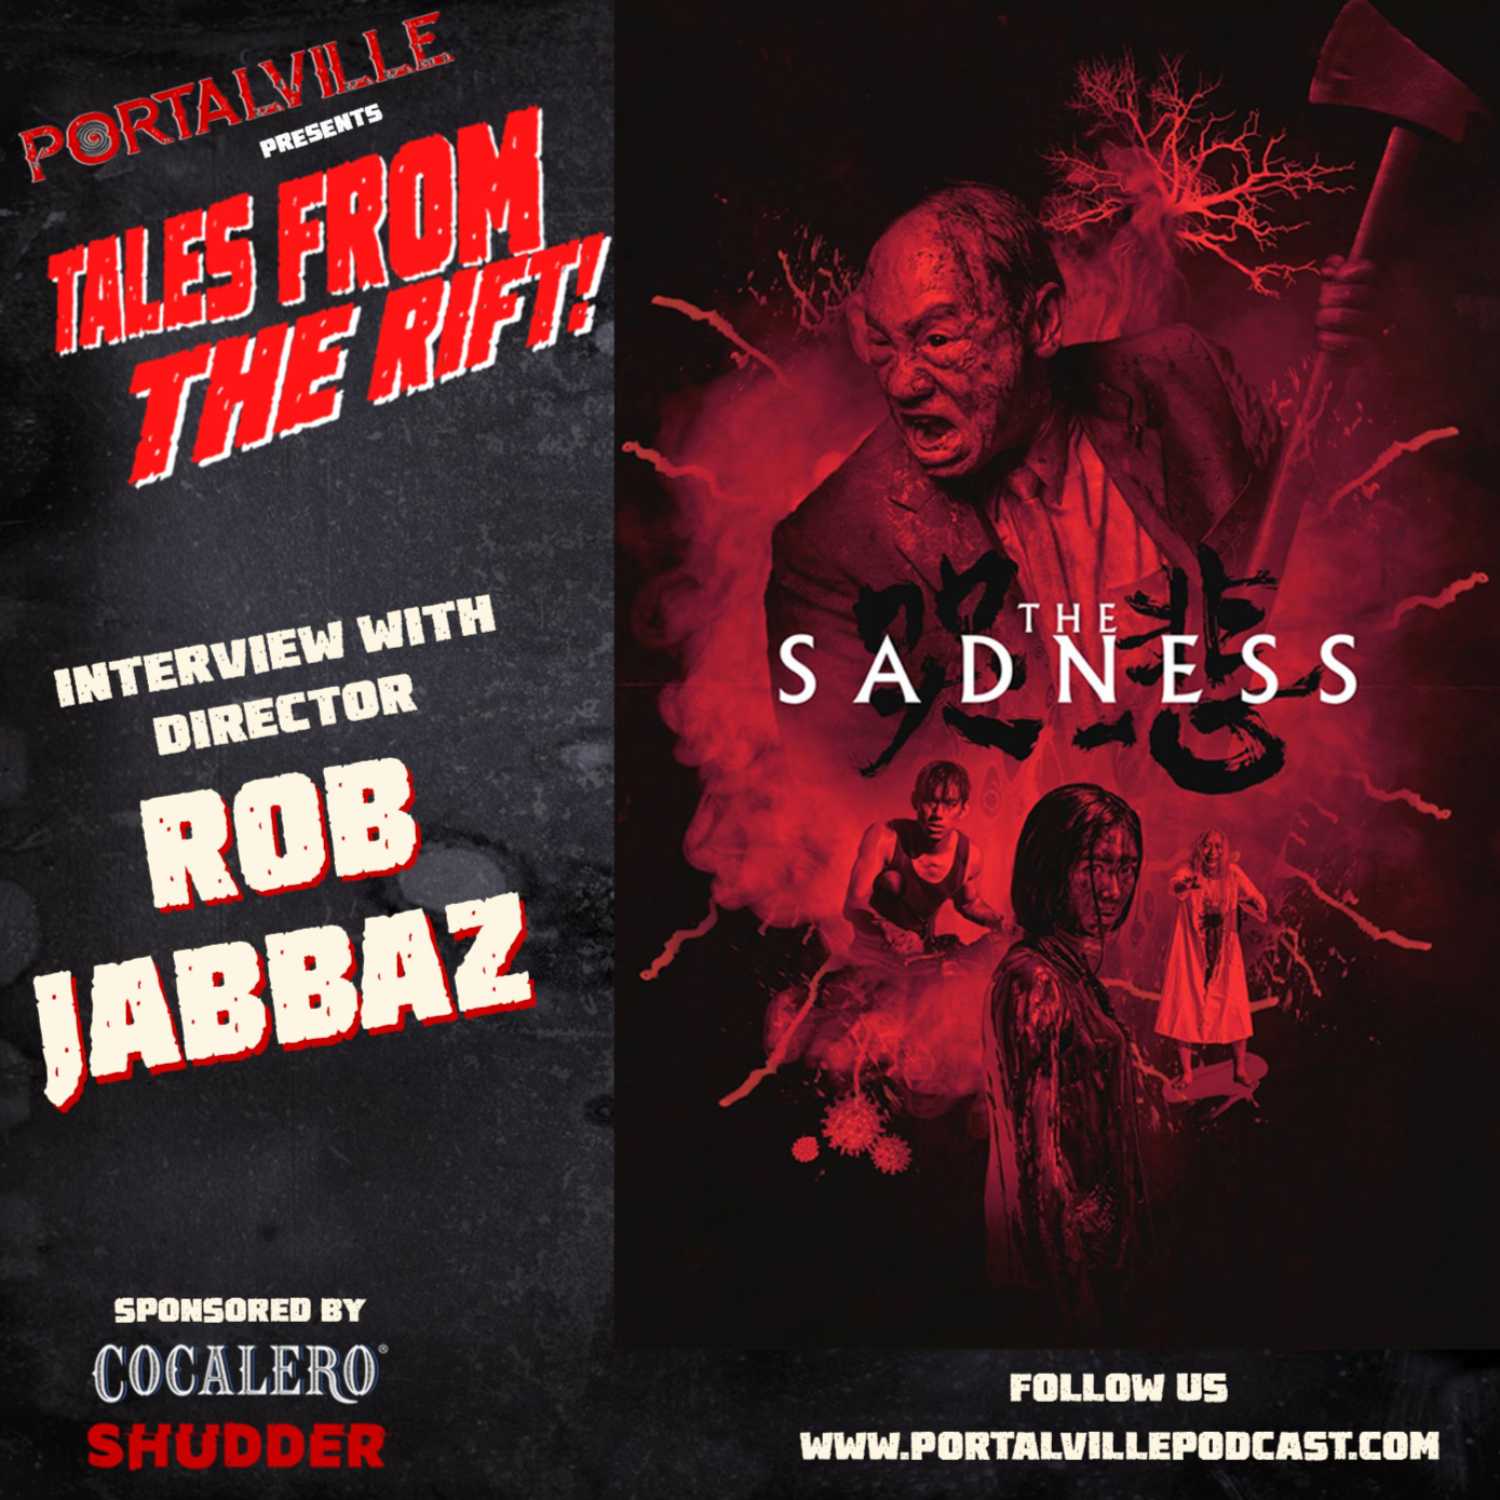 Episode image for The Sadness! Interview with Director Rob Jabbaz